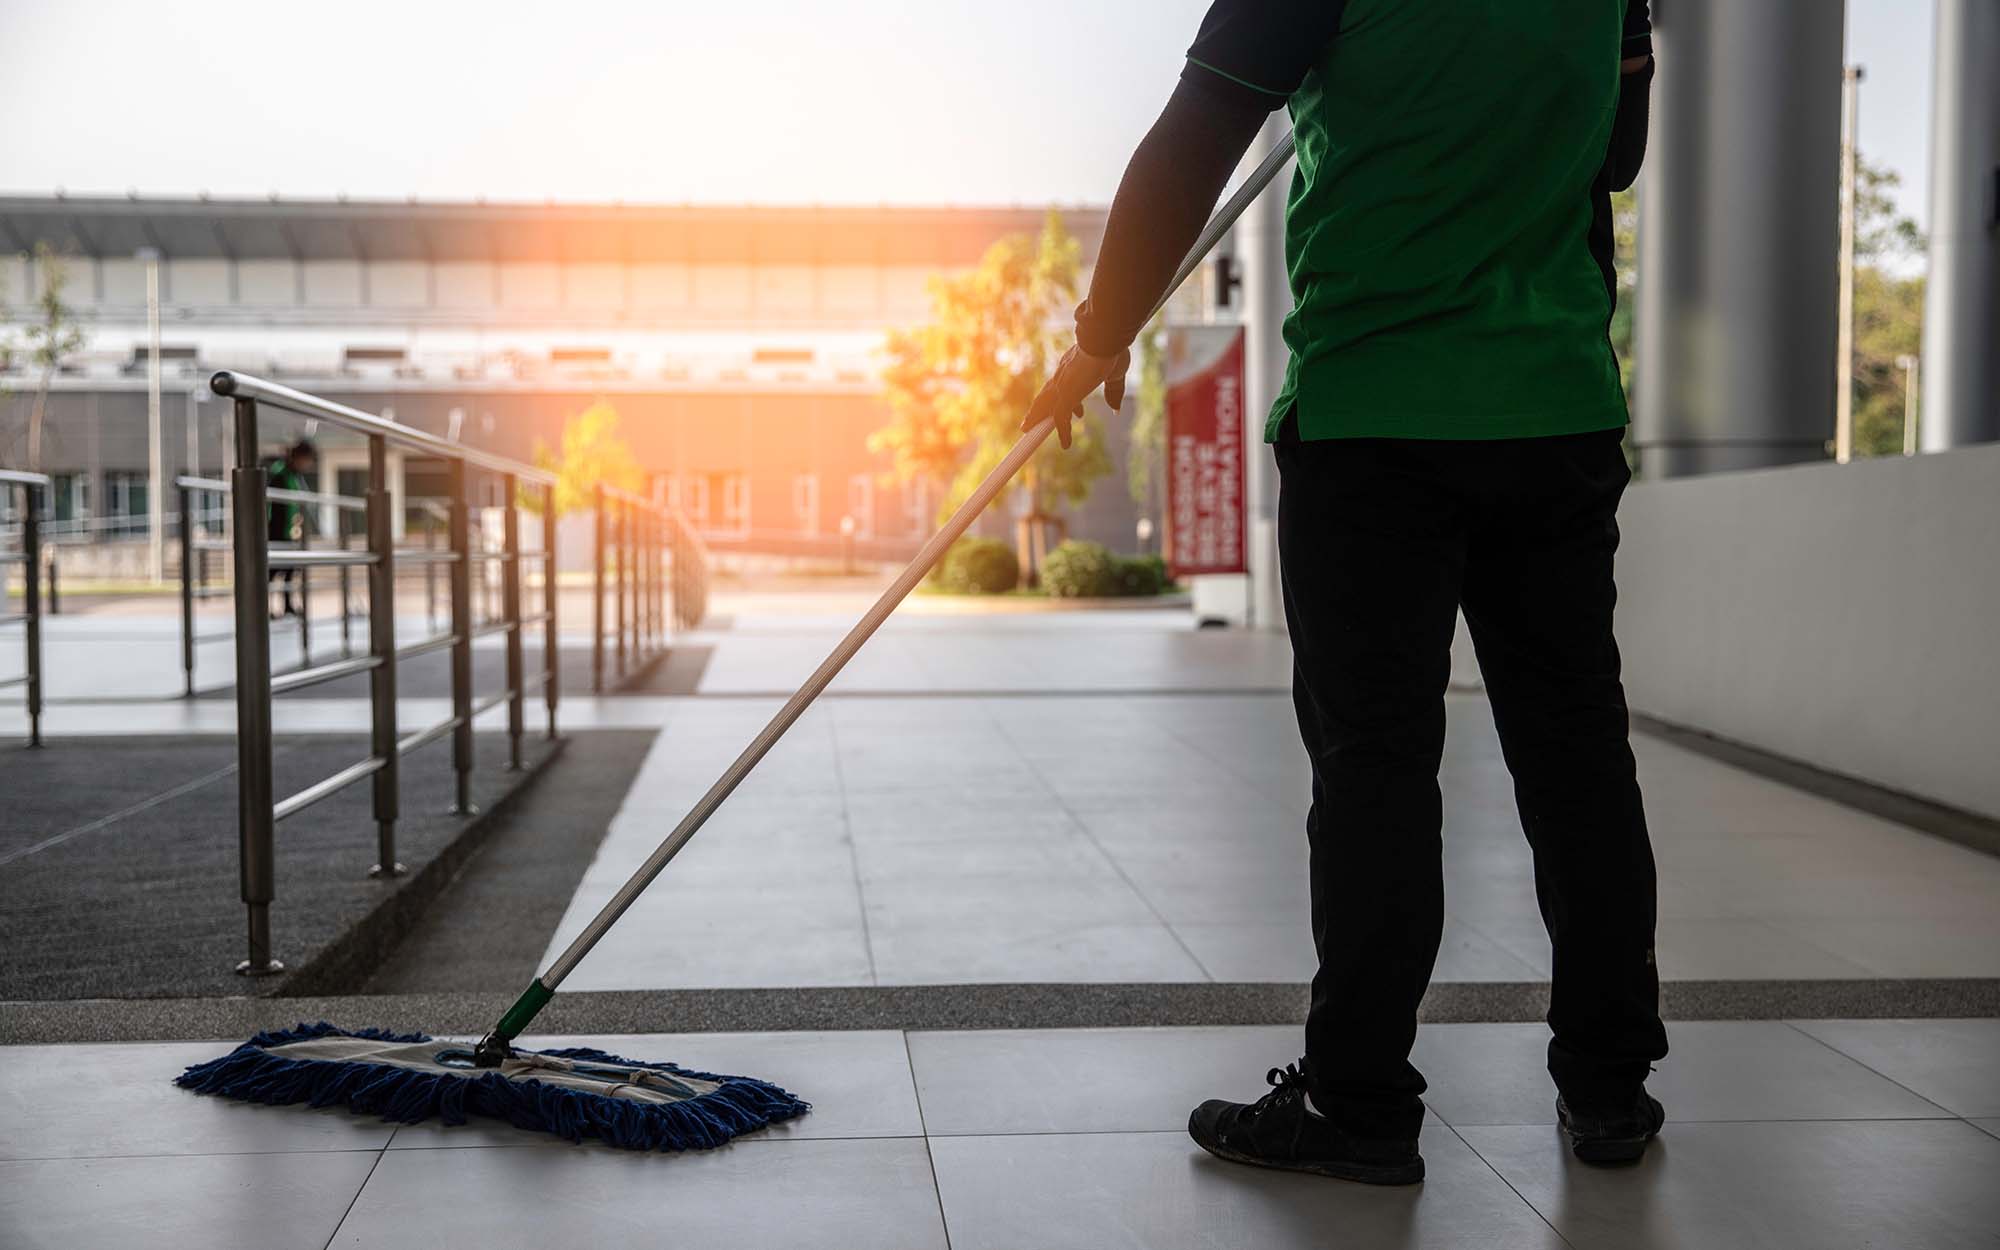 How To Hire House Cleaning Services